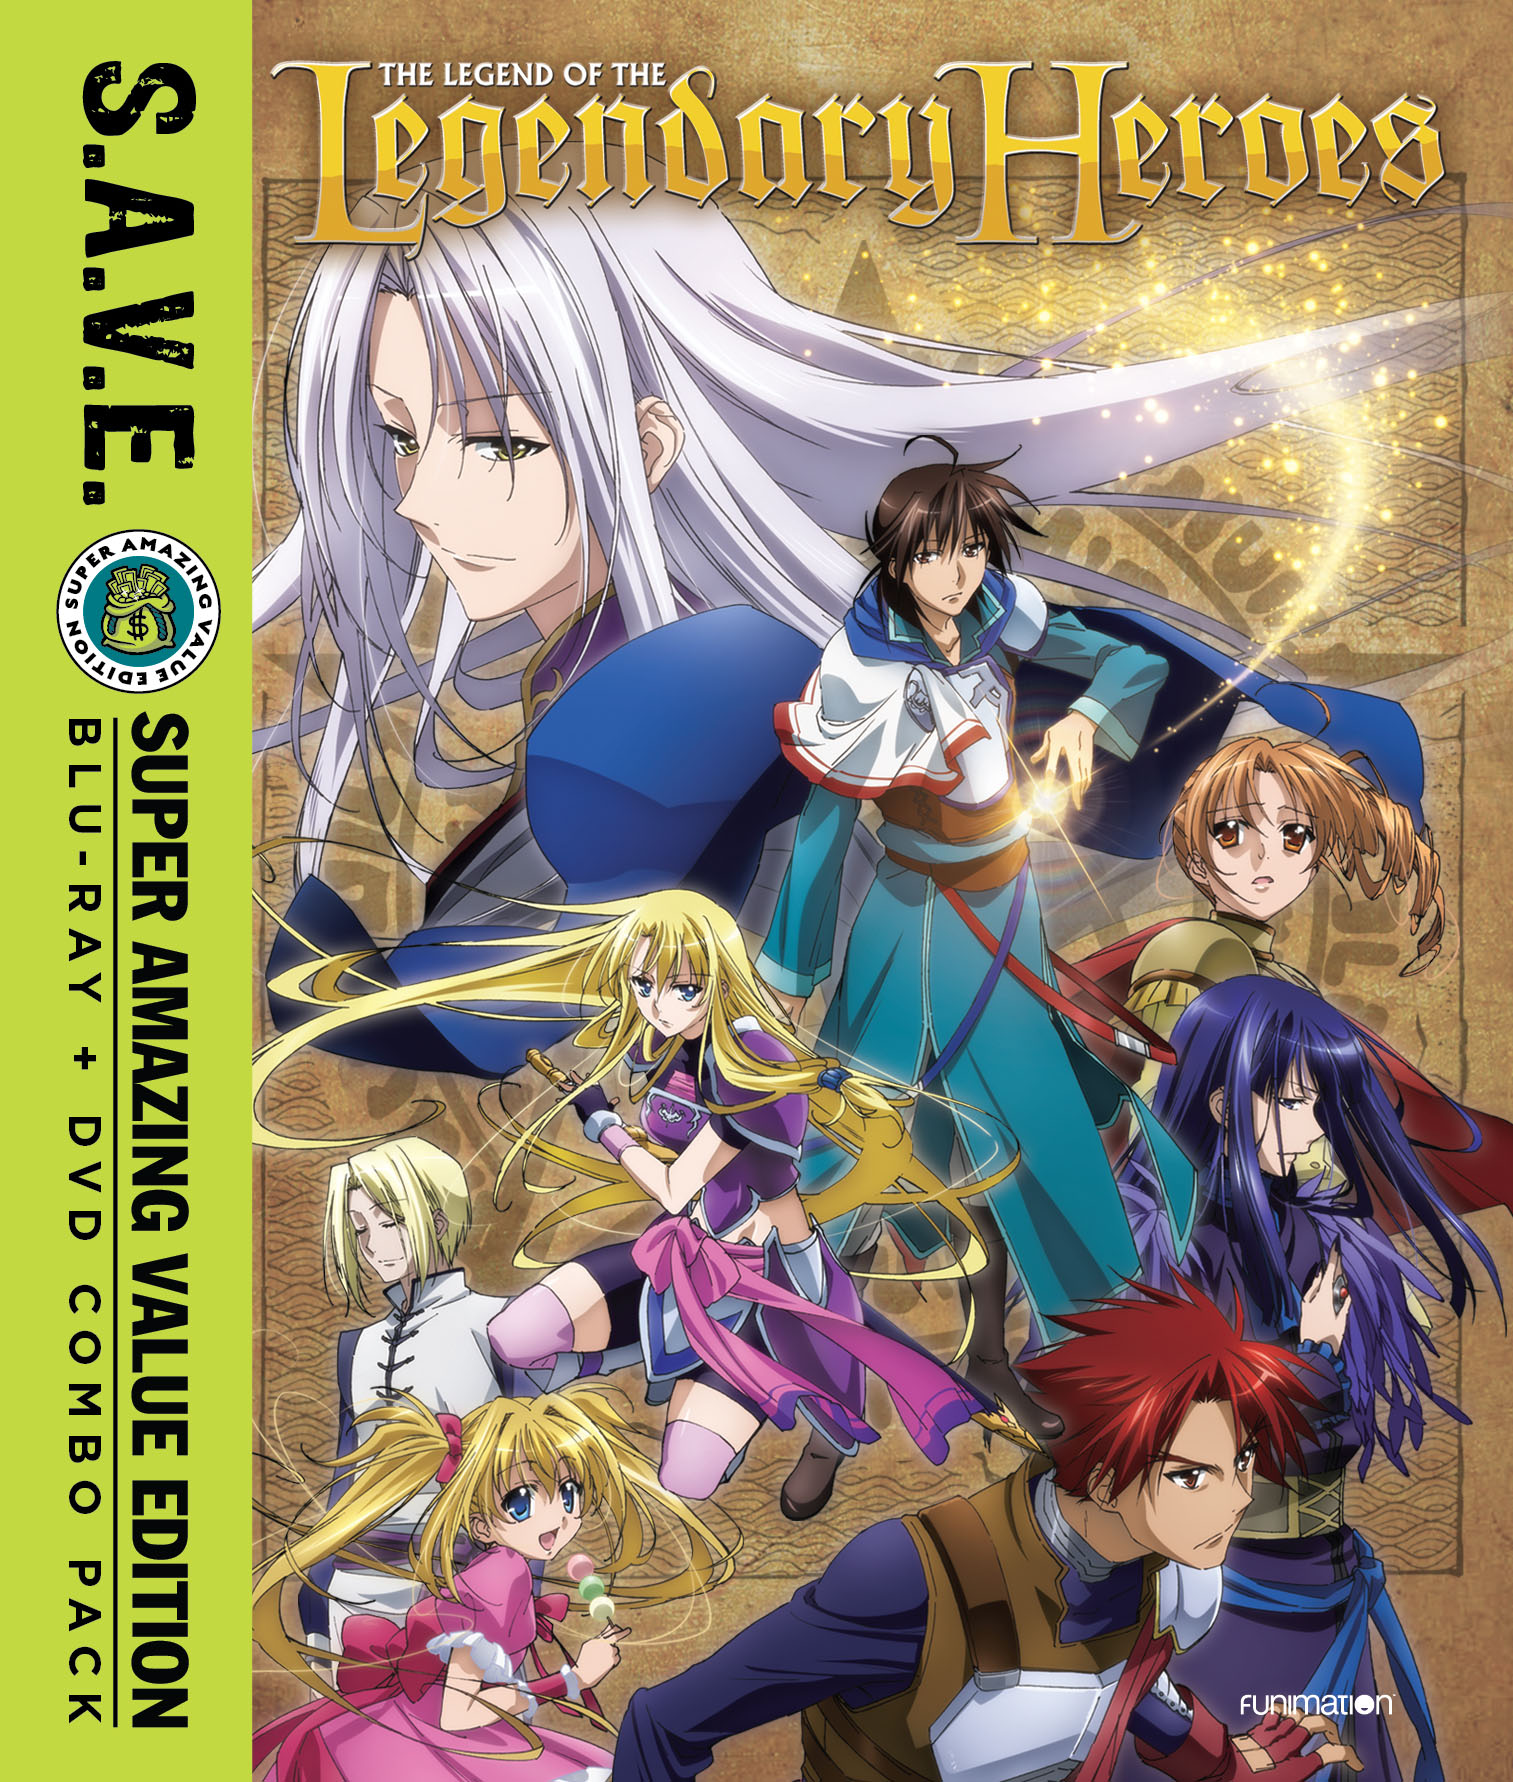 Best Buy: The Legend of the Legendary Heroes: The Complete Series